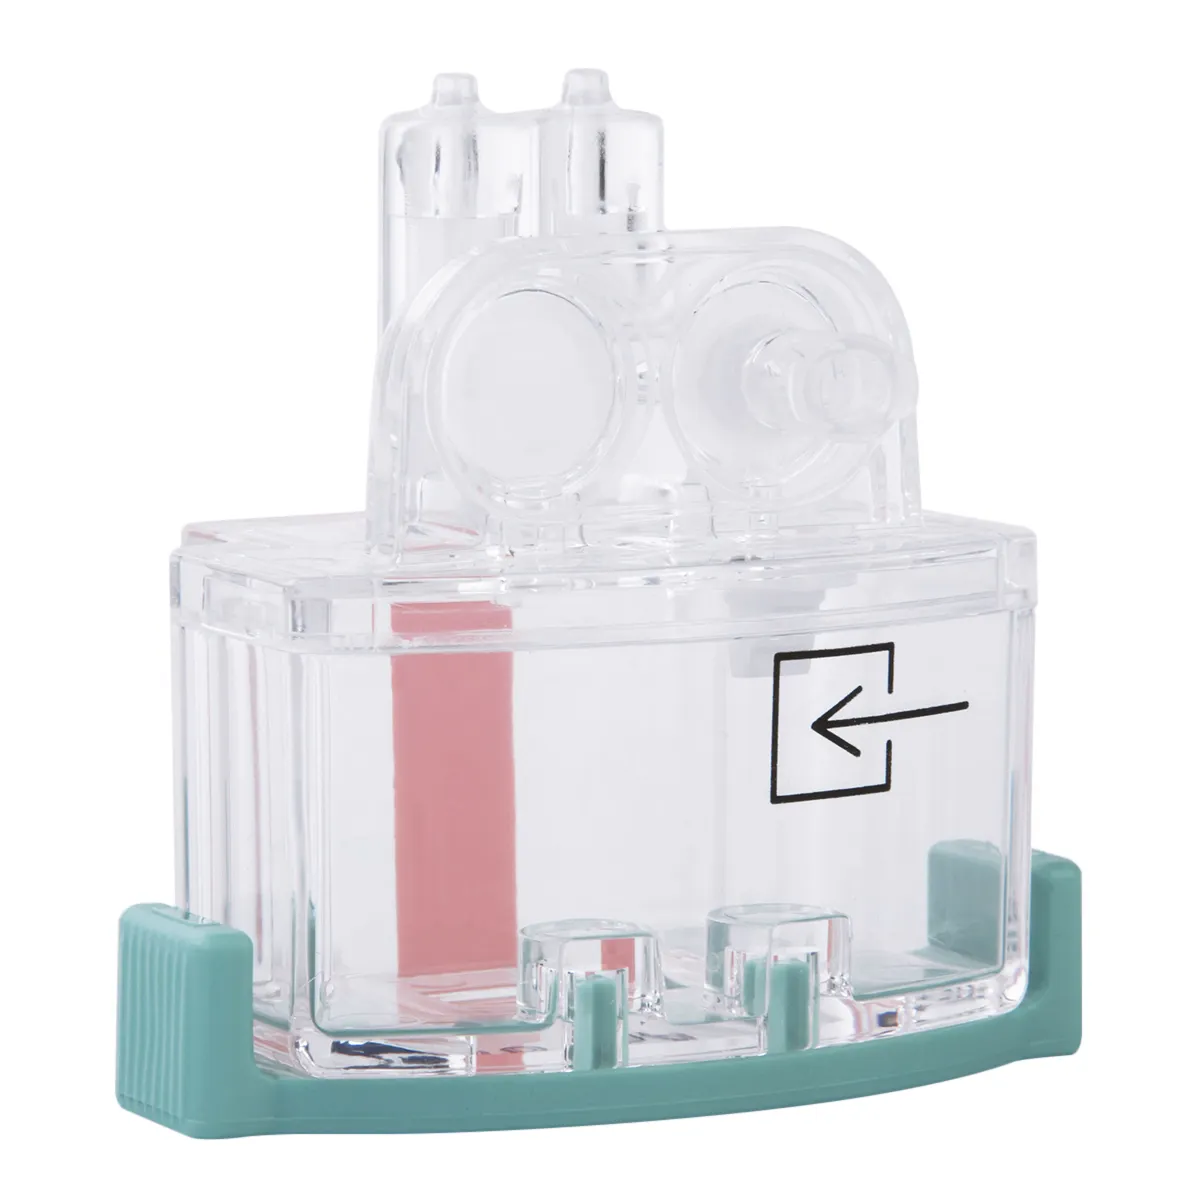 Own Made ETCO2 Water Trap For Anesthesia Gas Module